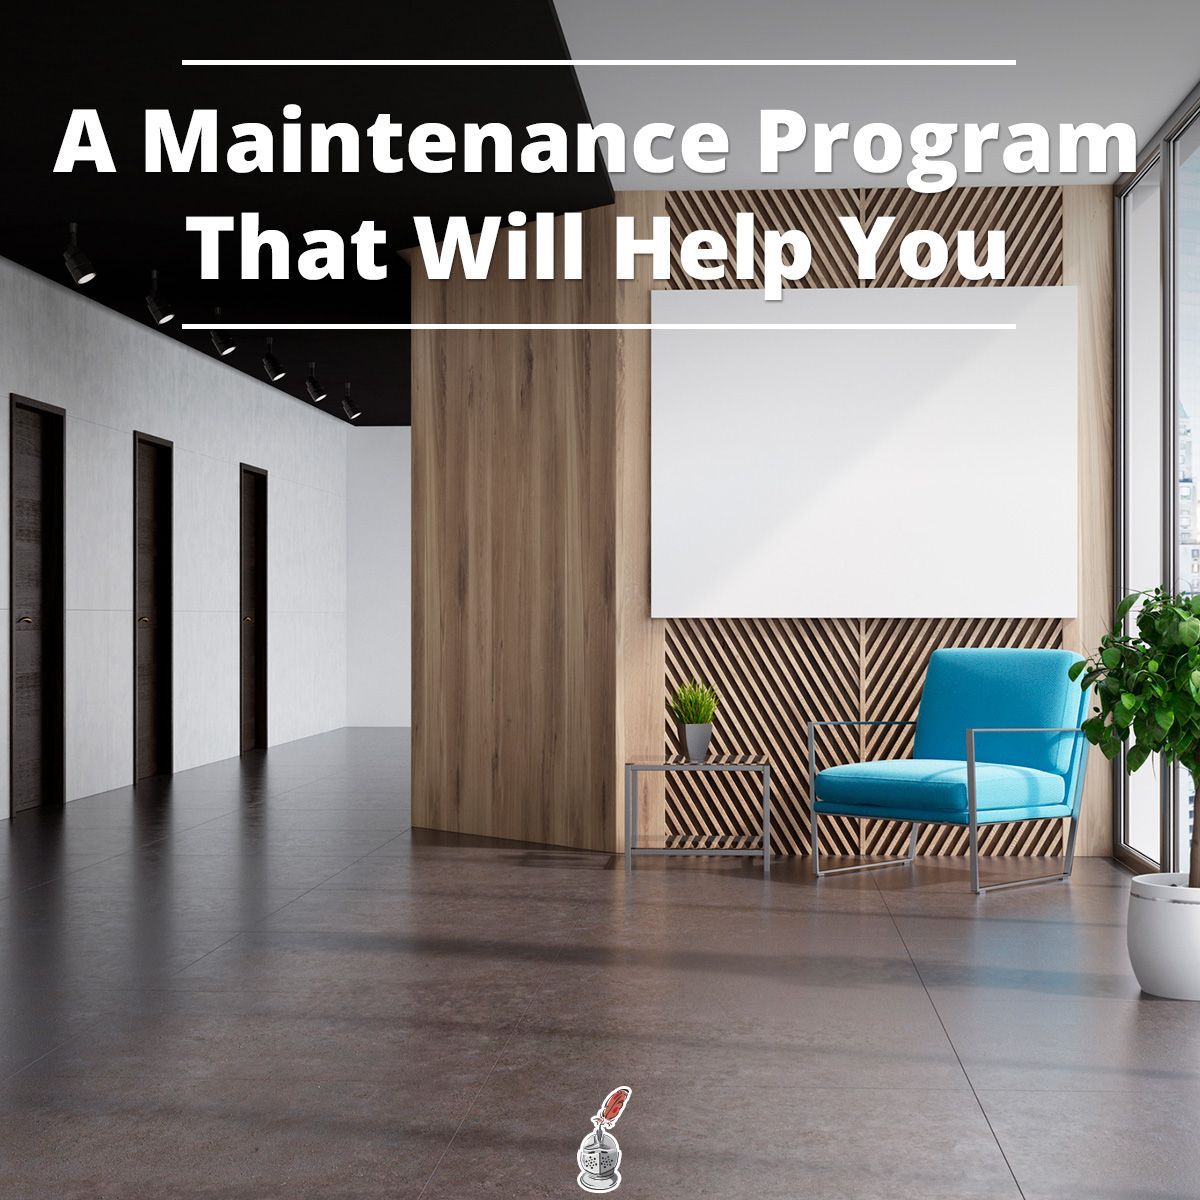 A Maintenance Program That Will Help You